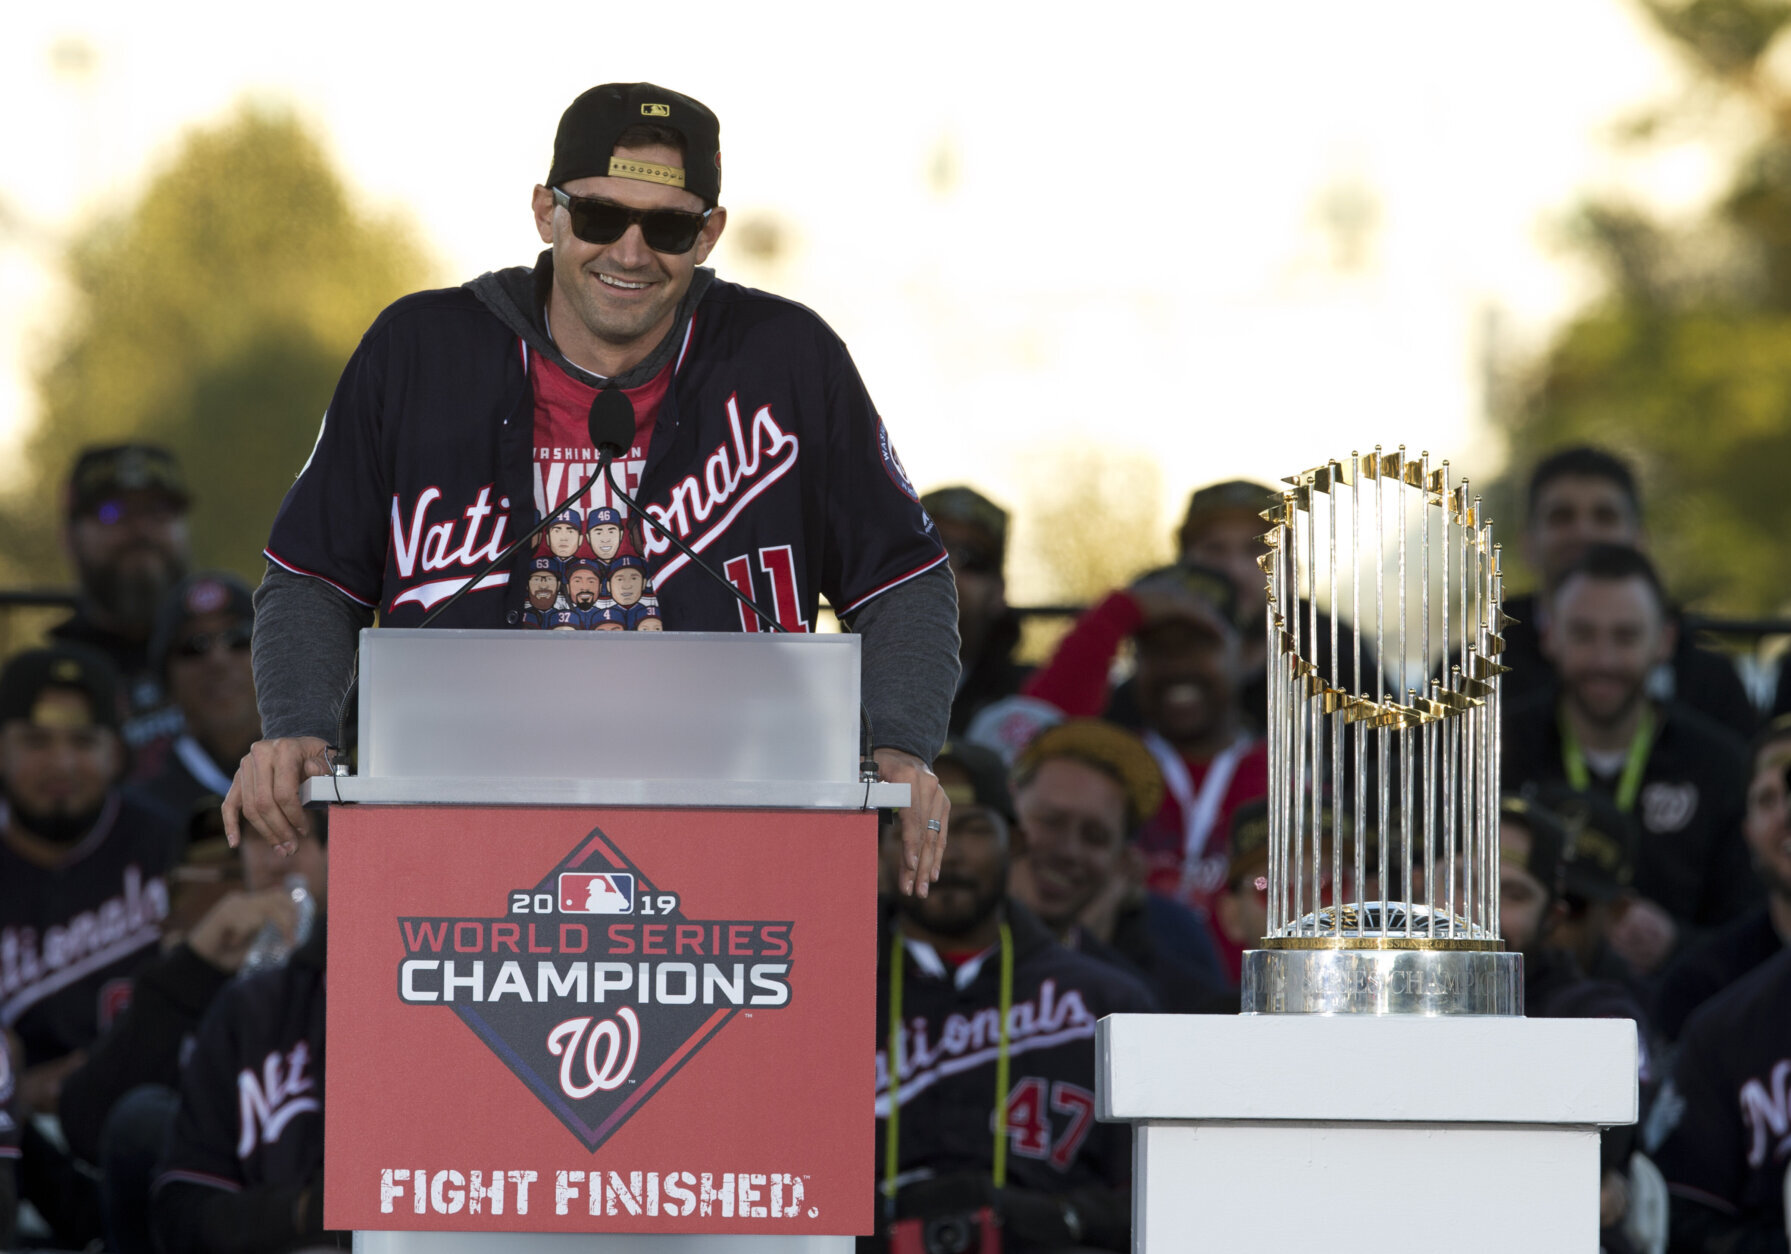 <p>… The Nats won the World Series! Mr. National himself was grinning ear-to-ear when he took the podium for the team&#8217;s parade back in D.C. just days after they &#8220;Finished the Fight&#8221; in Houston with a 7-2 series clinching victory. For all the pain that October had brought on the franchise, it only made this moment even sweeter.</p>
